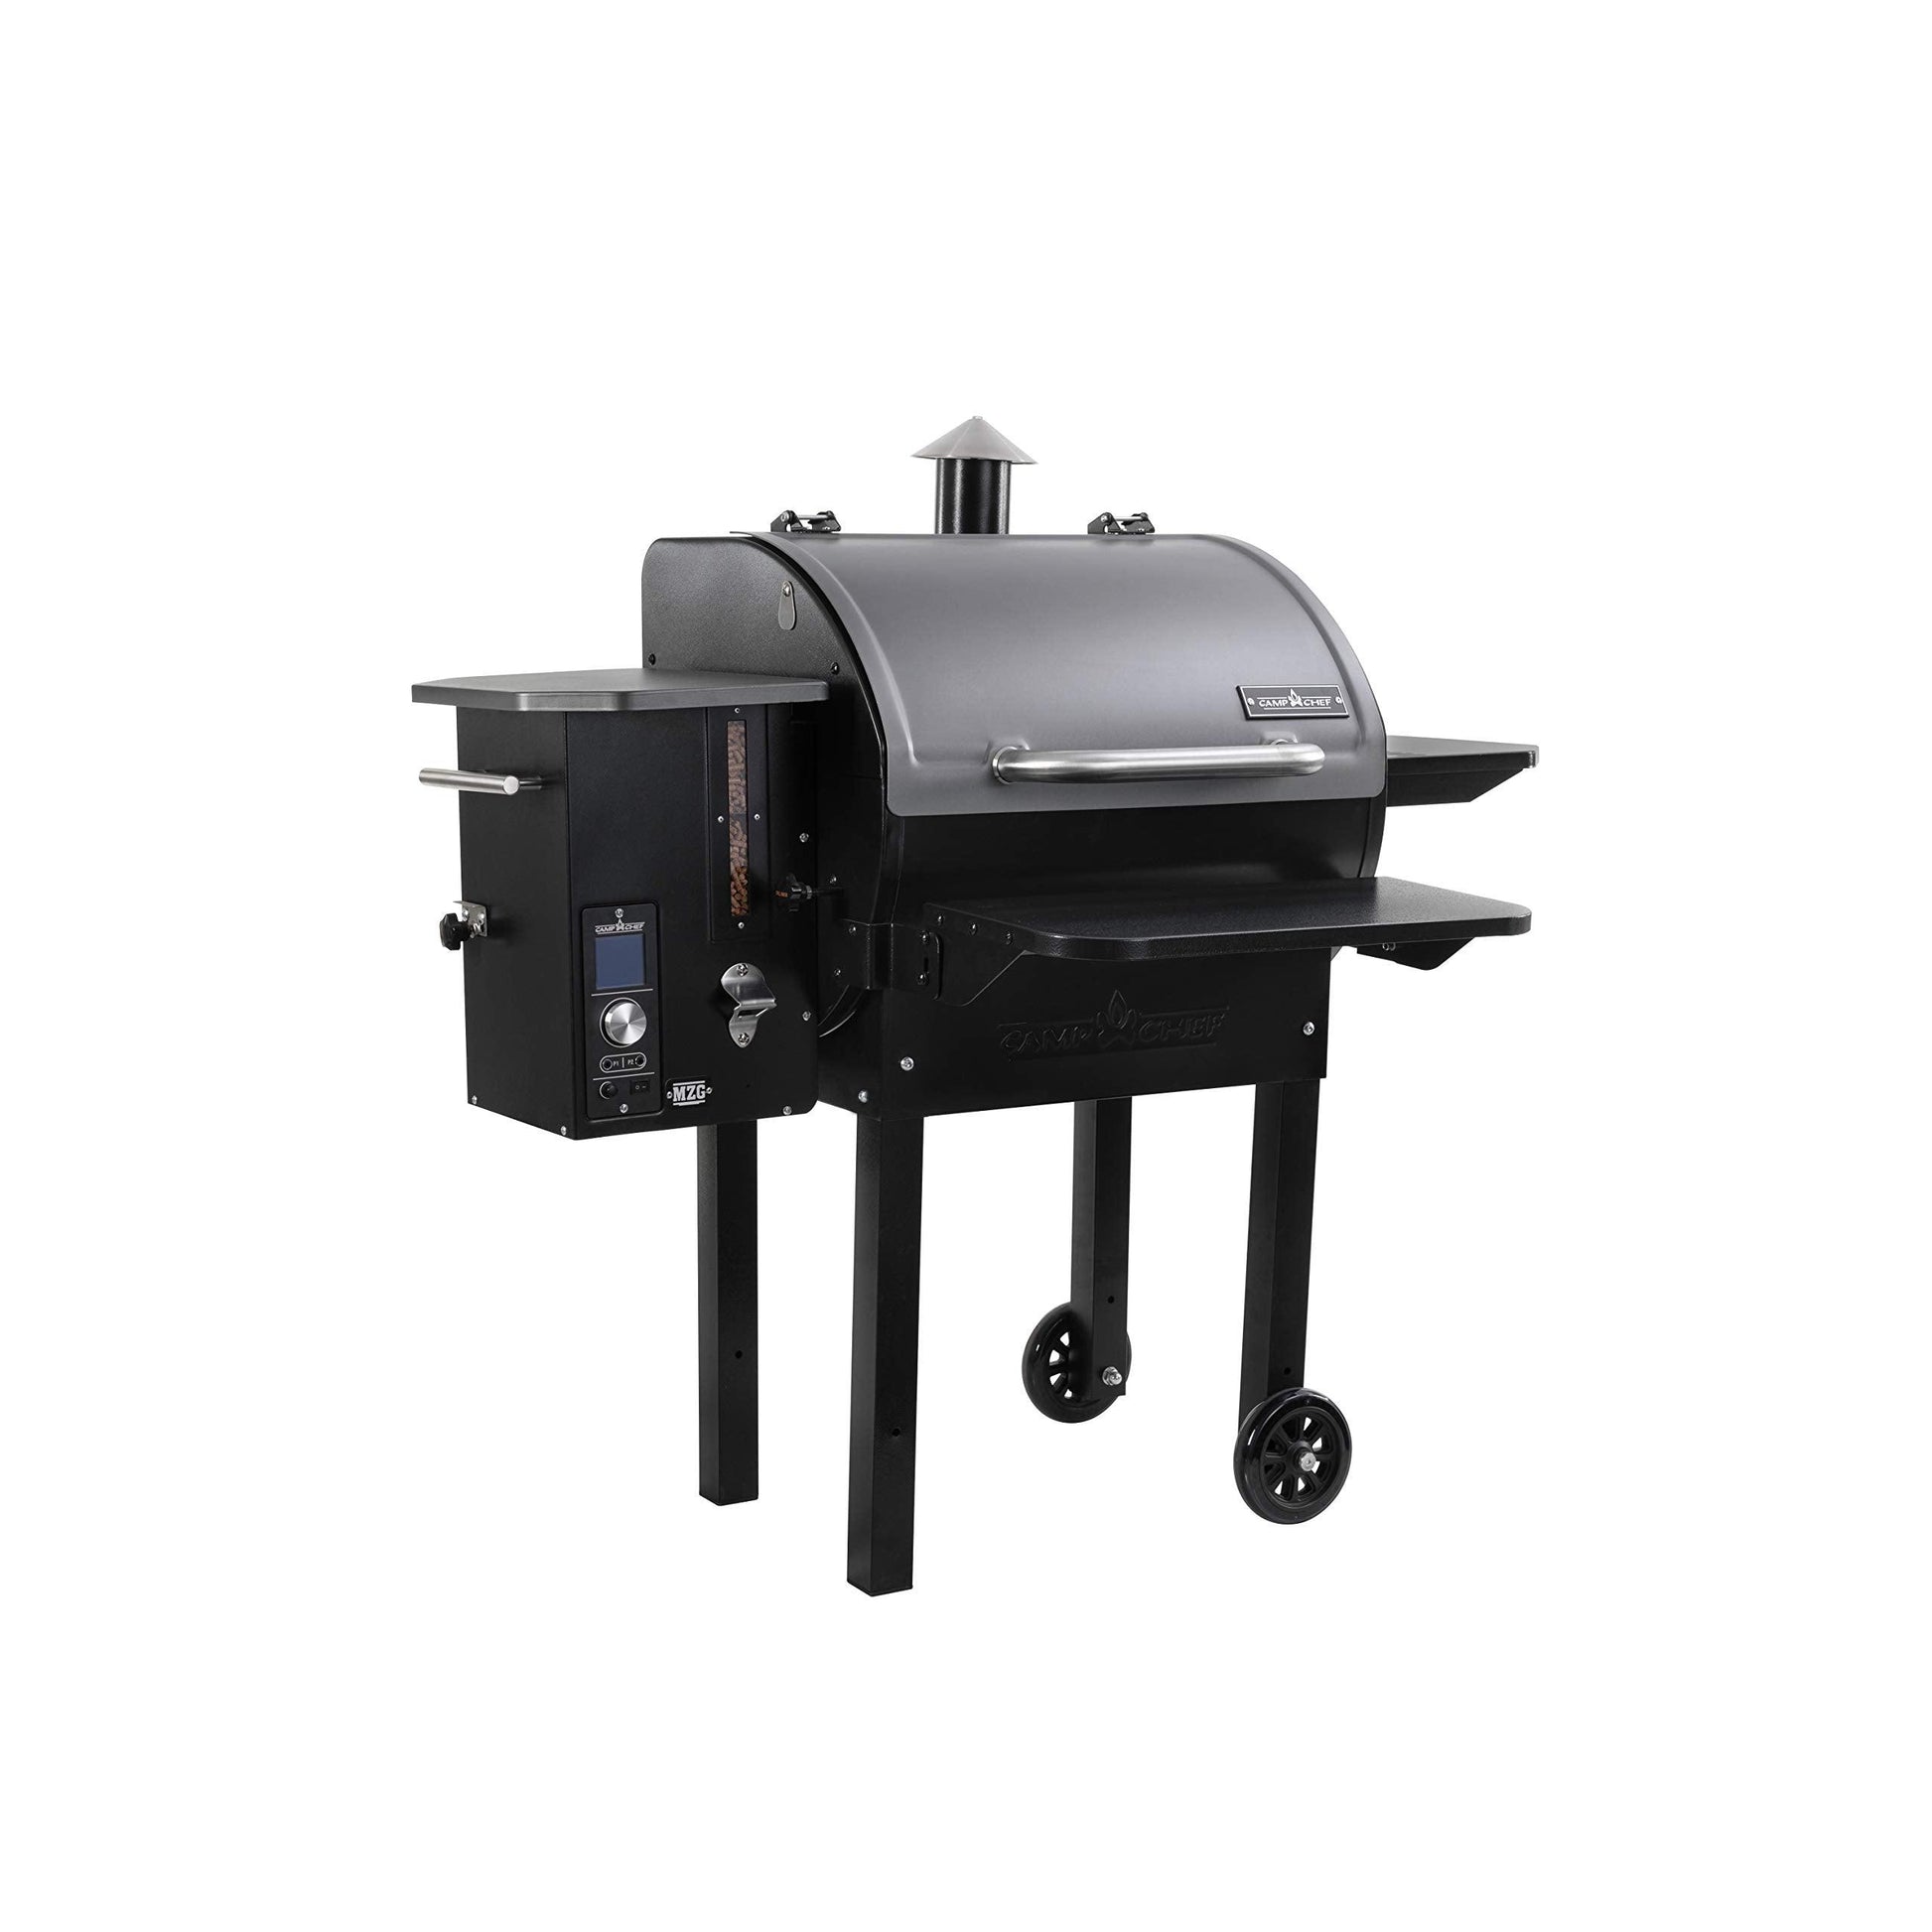 Camp Chef PG24MZG SmokePro Slide Smoker with Fold Down Front Shelf Wood Pellet Grill, Pack of 1, Black - CookCave